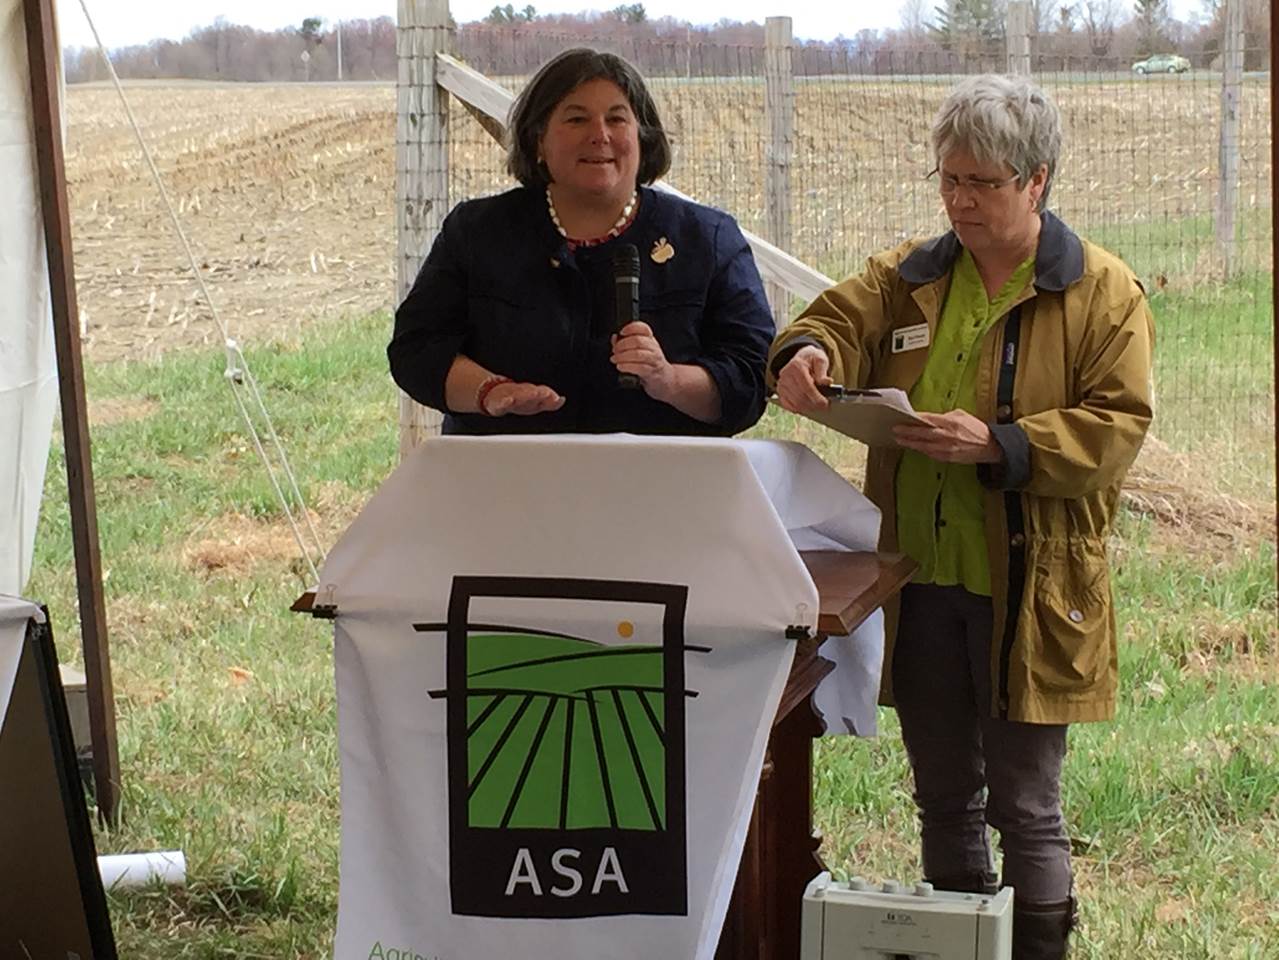 In April 2015, Assemblywoman Woerner joined Agriculture Stewardship Association (ASA) director, Teri Ptacek in celebrating the organization’s 25th anniversary. ASA has worked to conserve over 100 farm